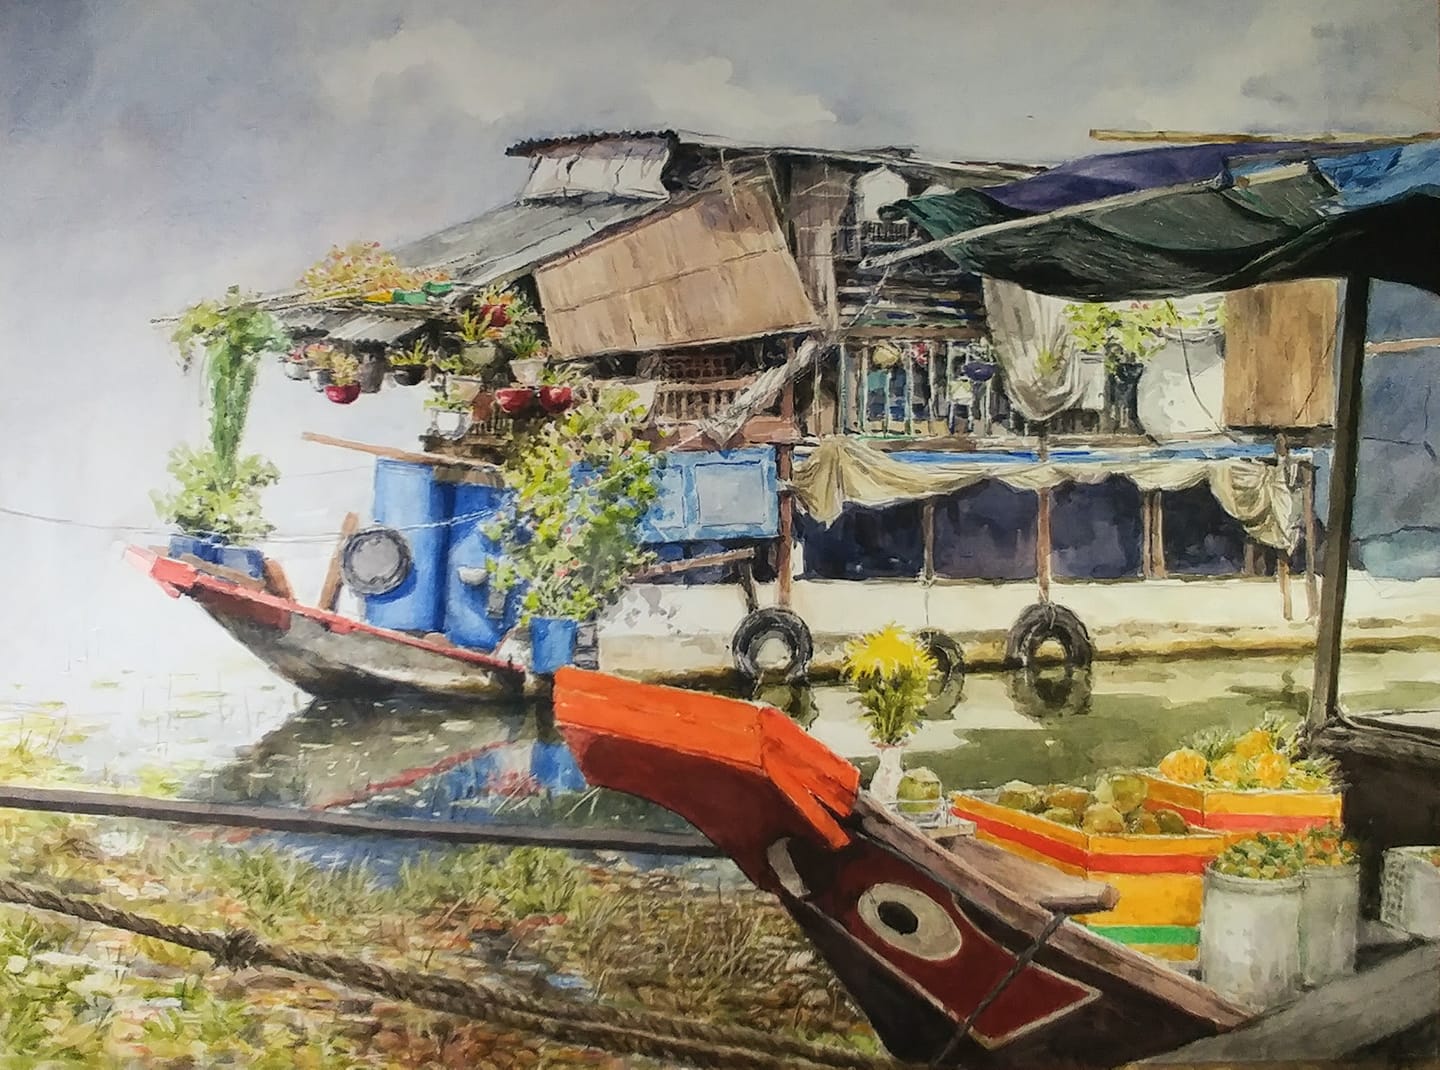 <em>This painting by Vincent Monluc depicts boats carrying fruits and plants on the Saigon River.</em>